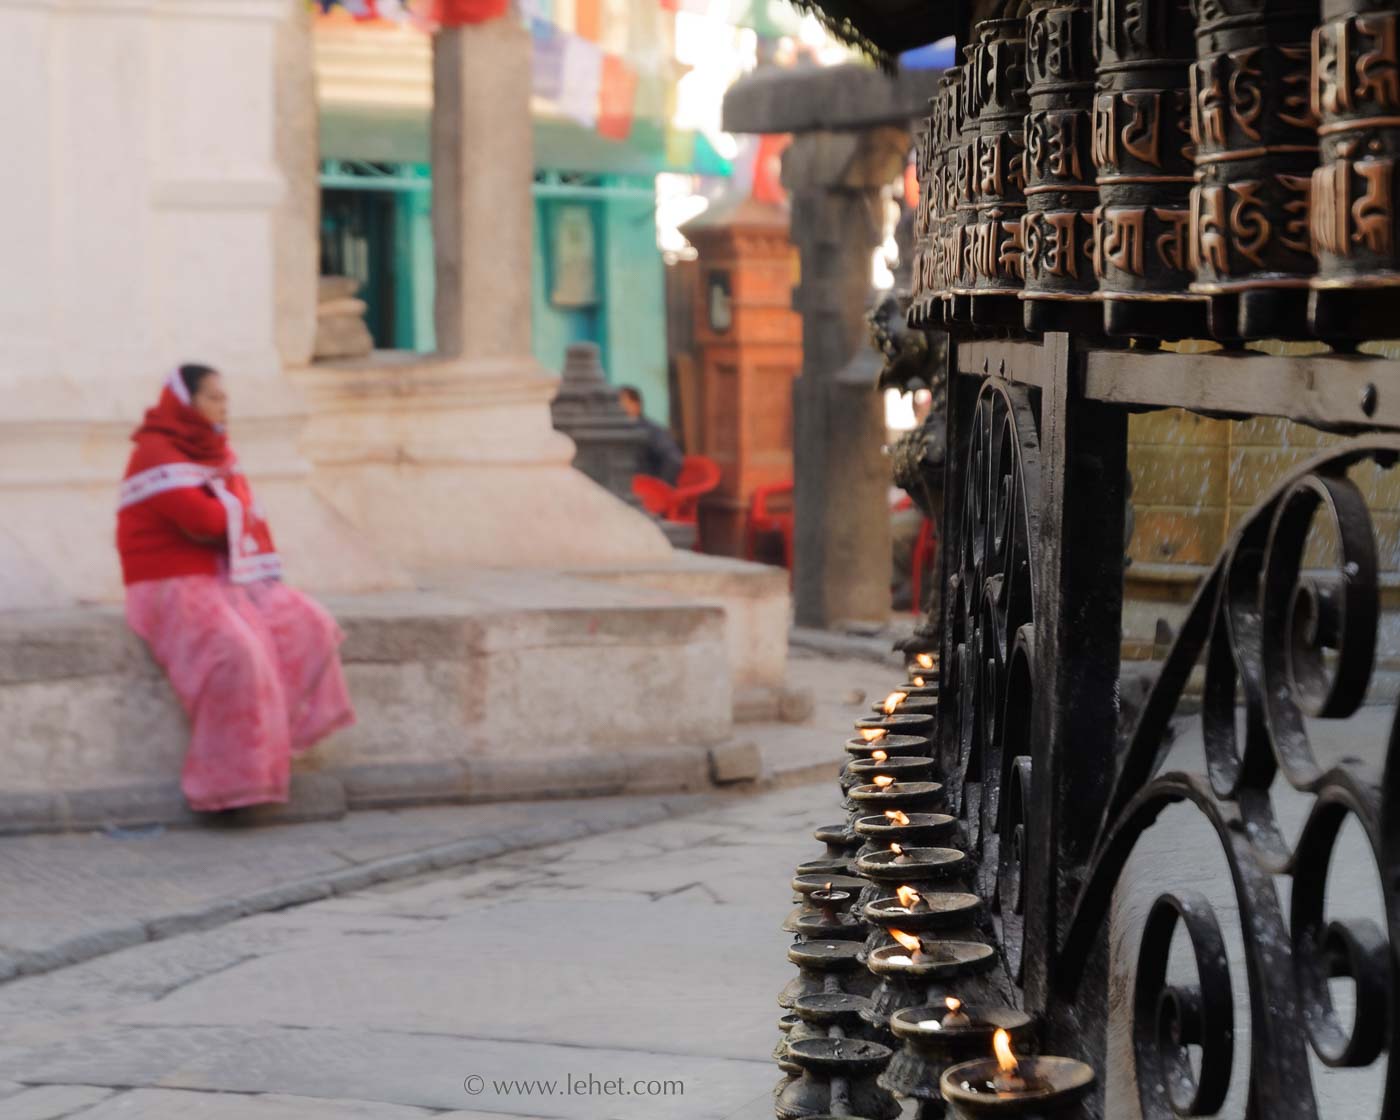 Candles, Prayer Wheels, Woman in Red and Pink